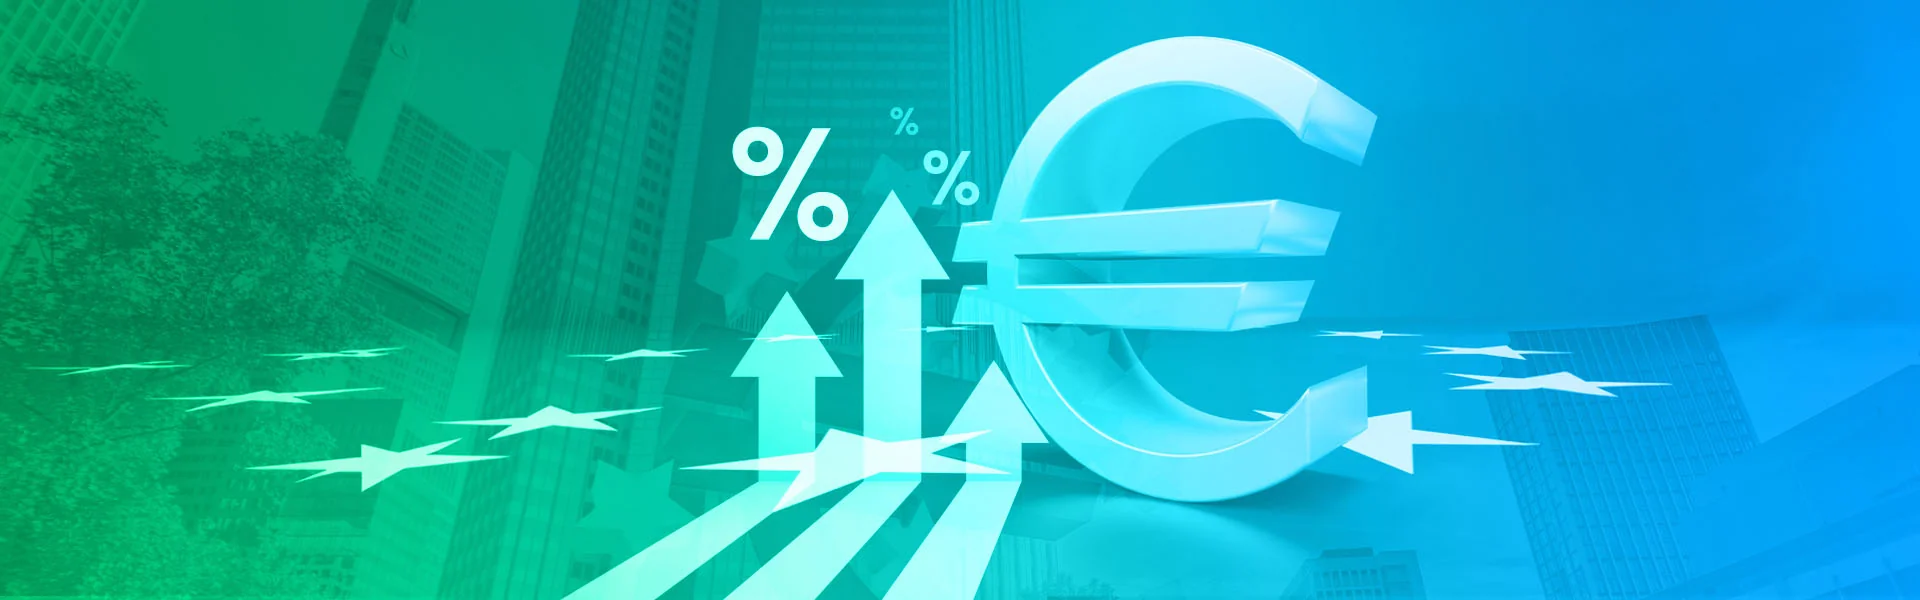 ecb poised for another rate hike company news 1920x600